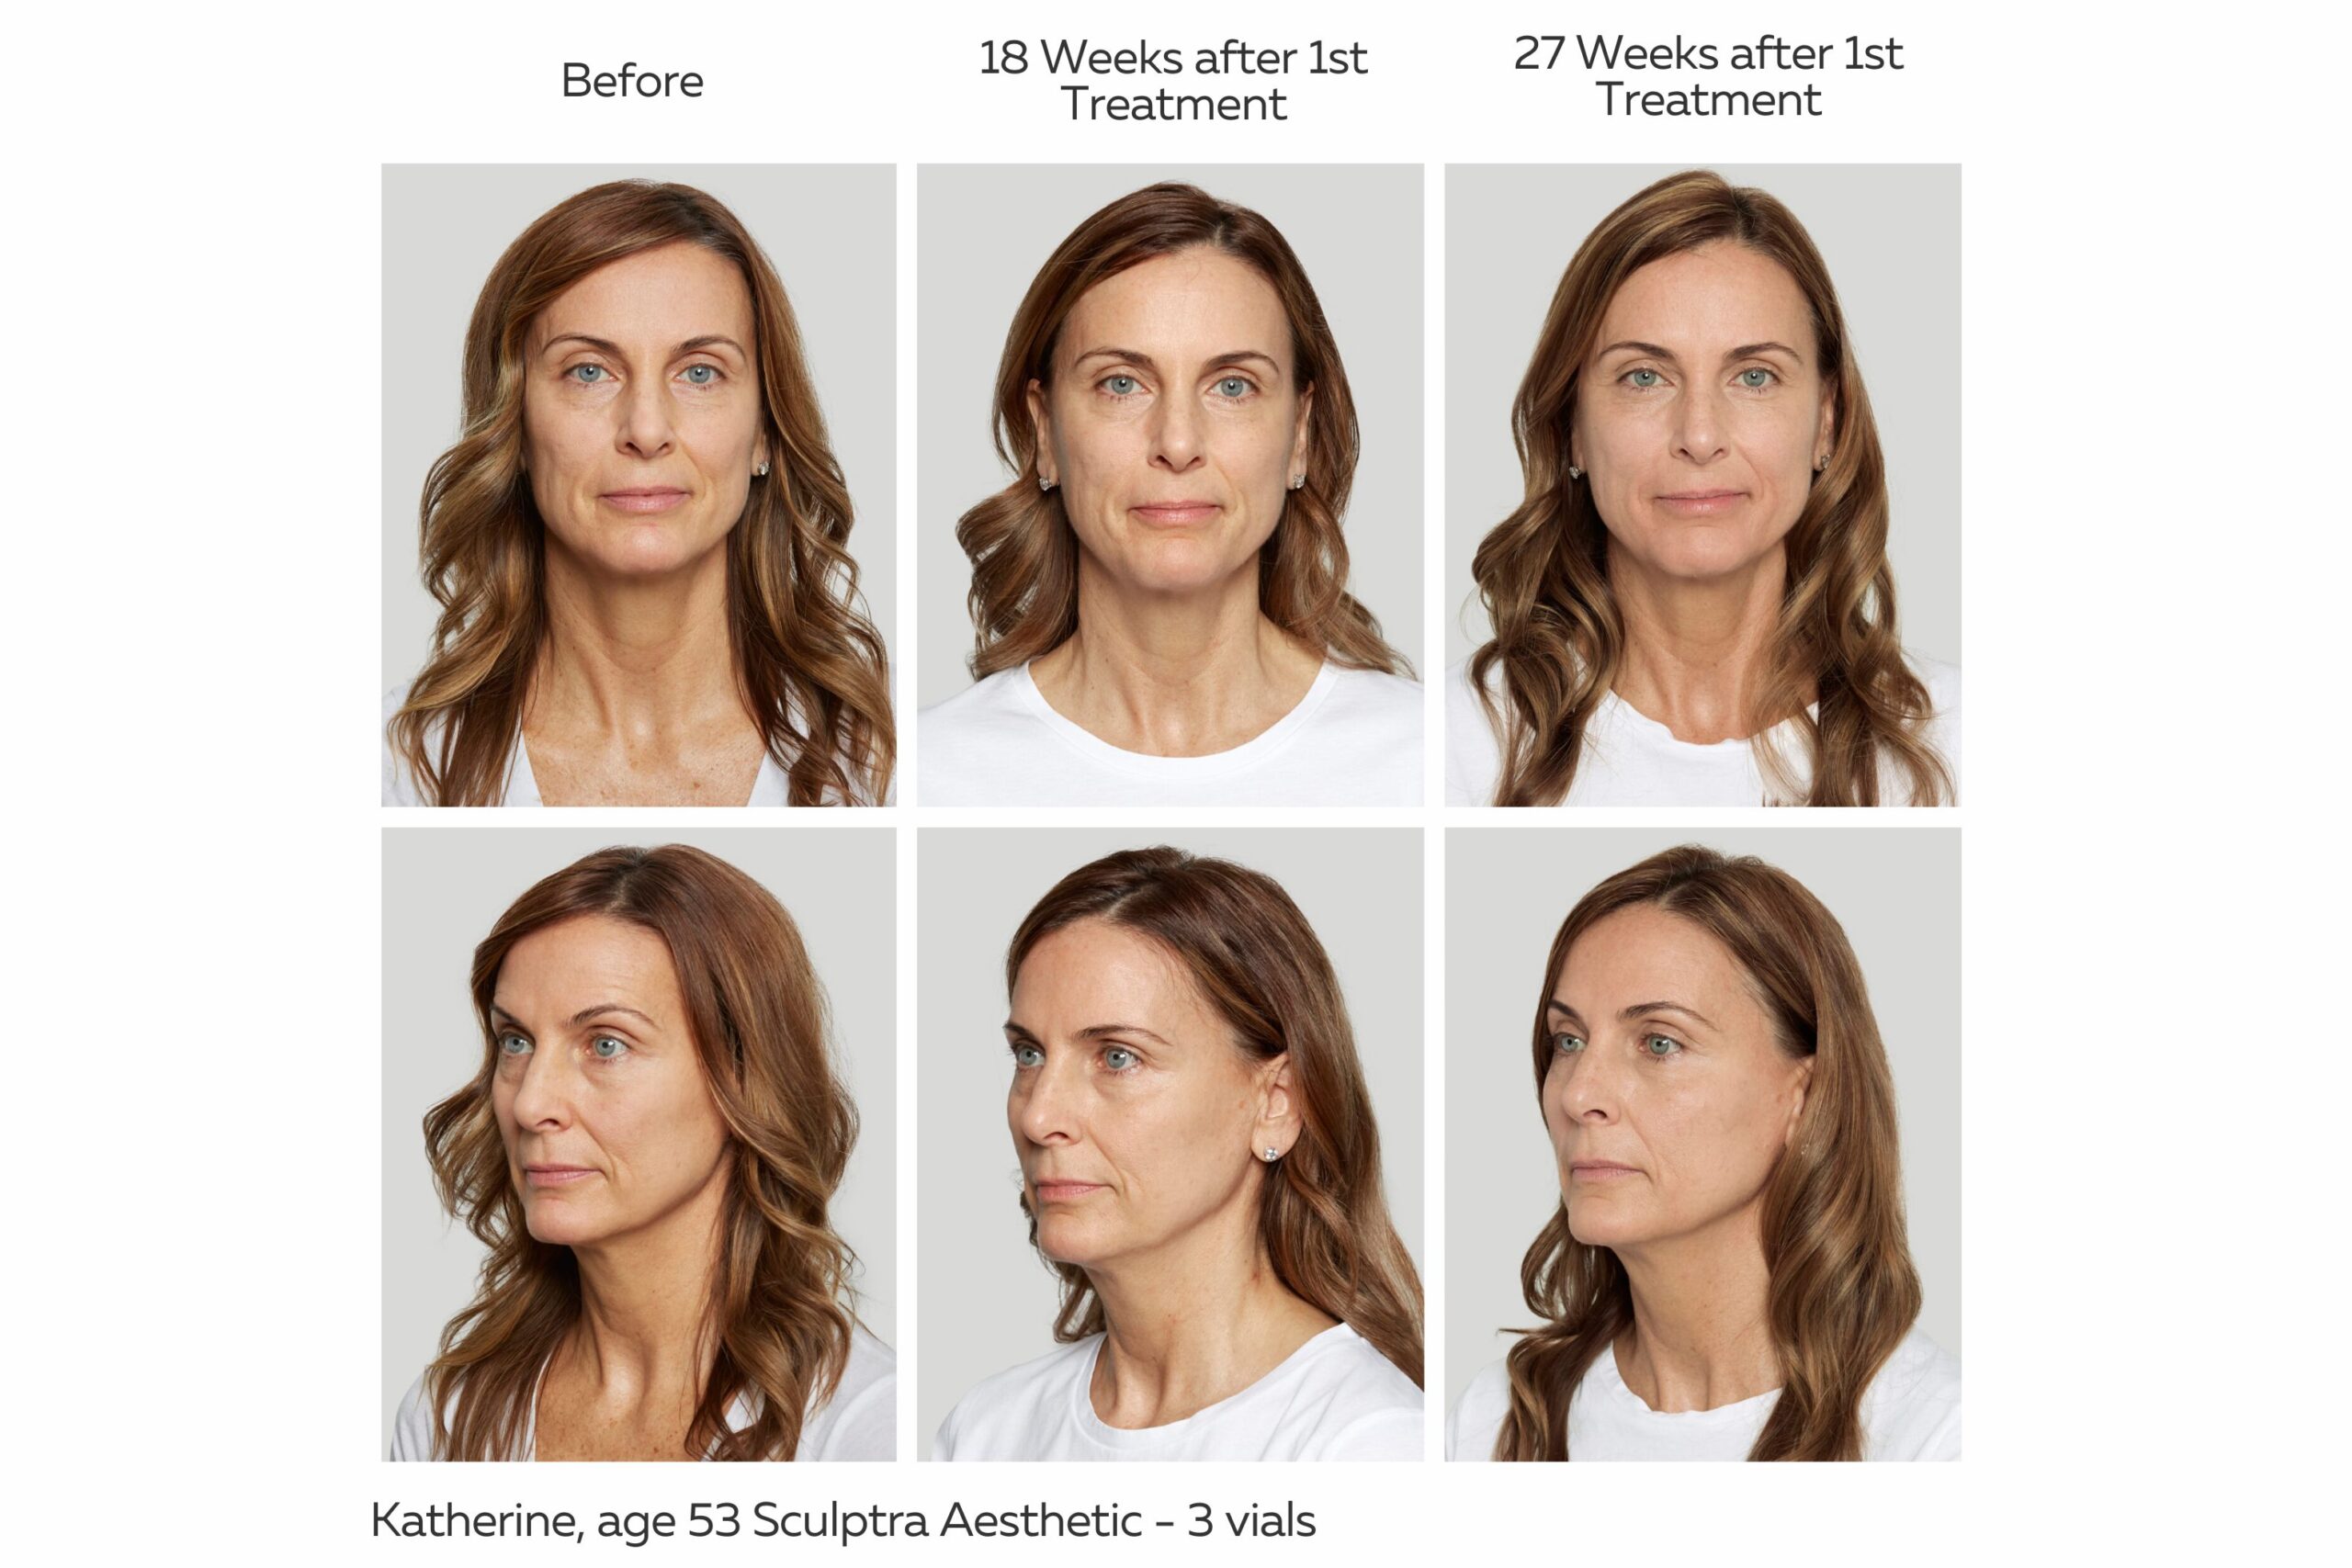 Sculptra Before and After Images